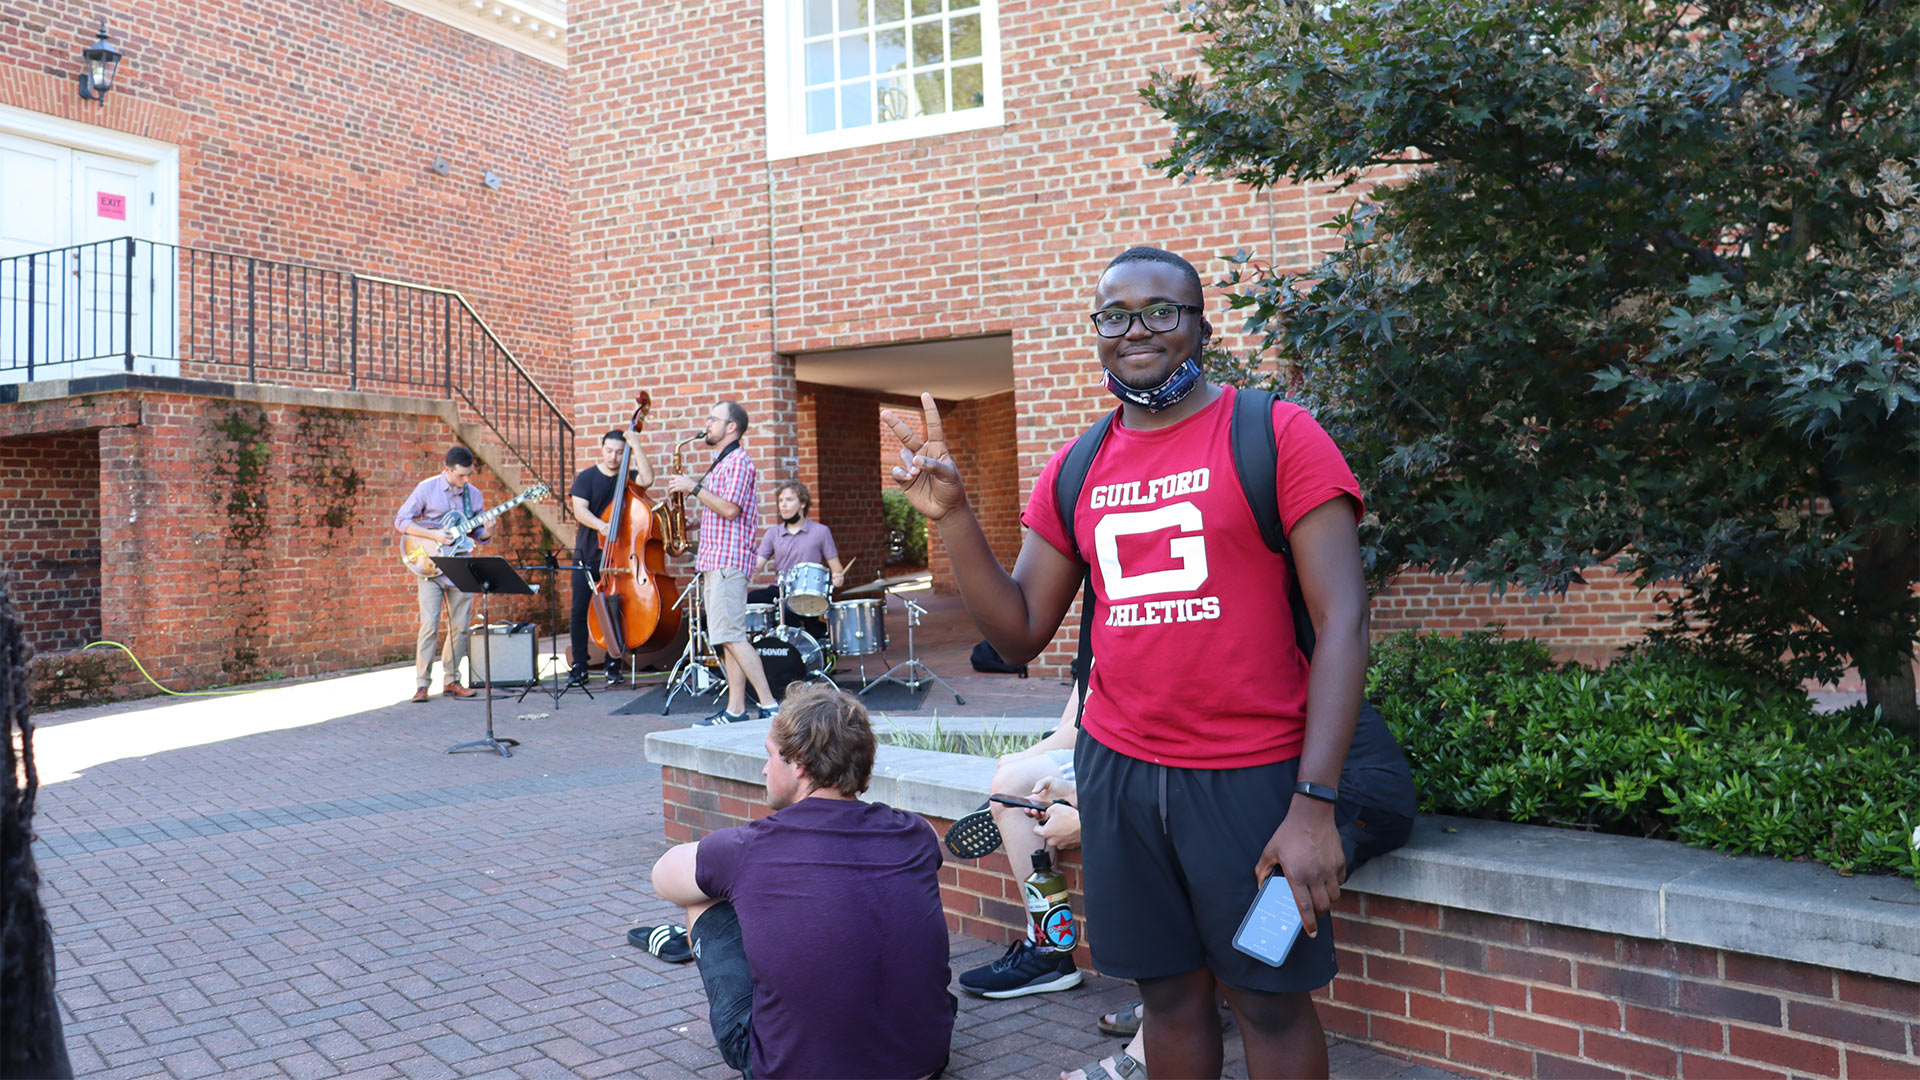 Deon McFarland '24, wearing a red Guilford t-shirt gives the peace sign to the photographer.